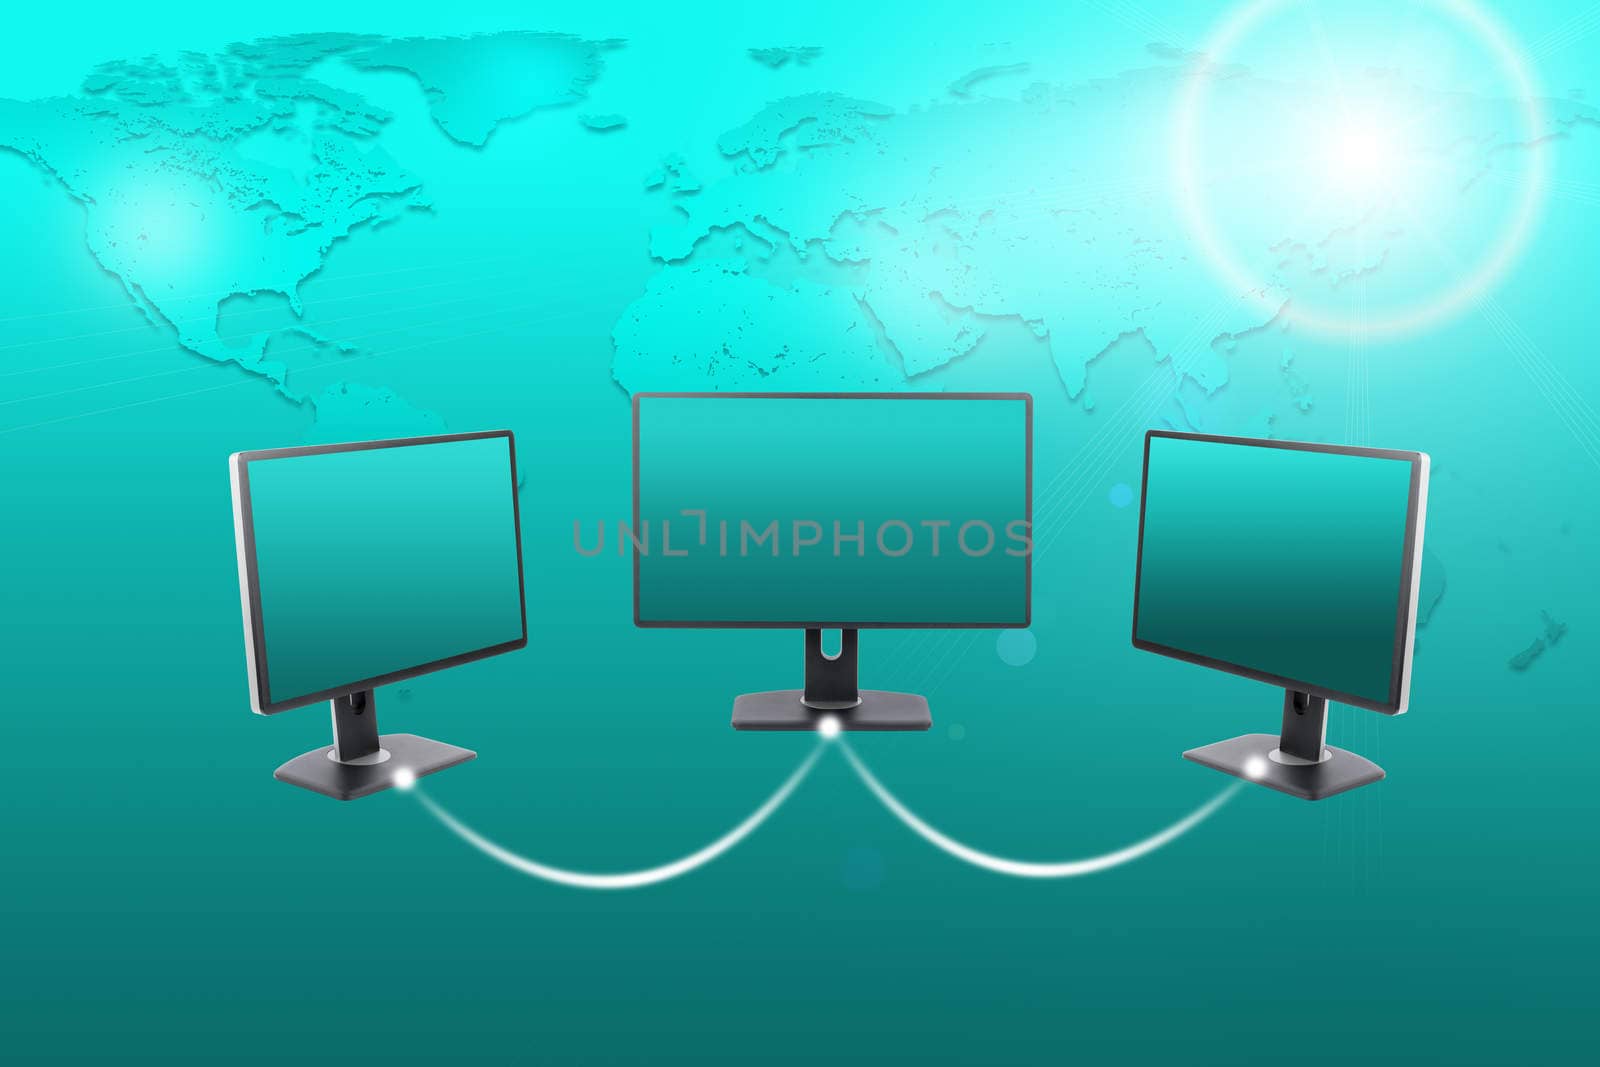 Set of monitors on abstract background with world map